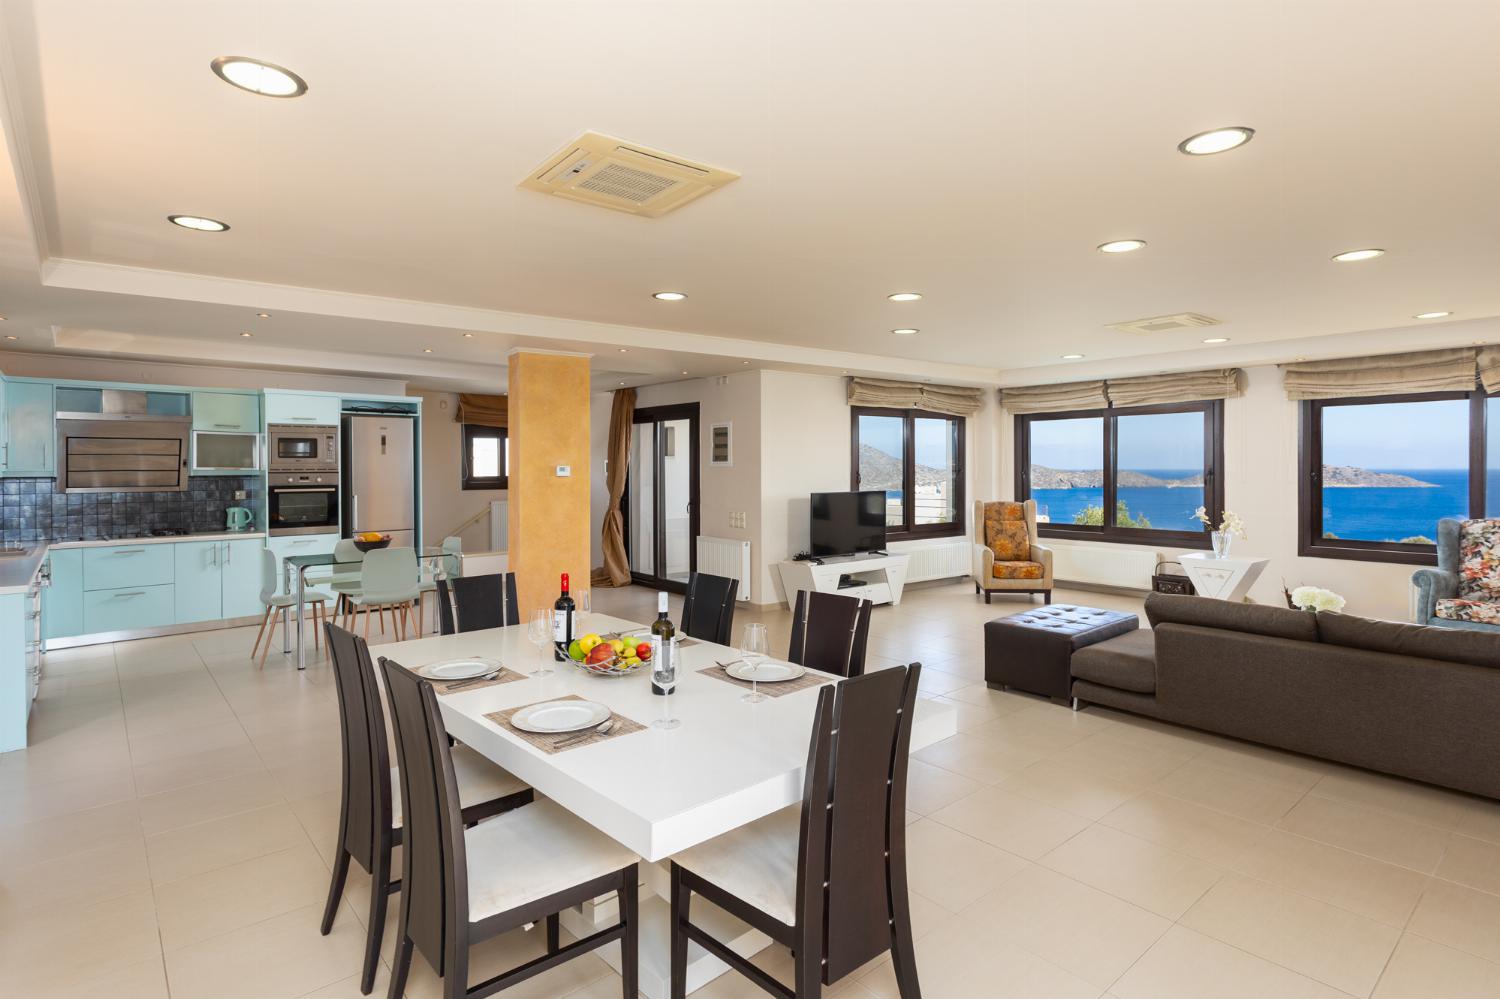 Open-plan living room with sofas, dining area, kitchen, A/C, WiFi internet, satellite TV, and panoramic sea views